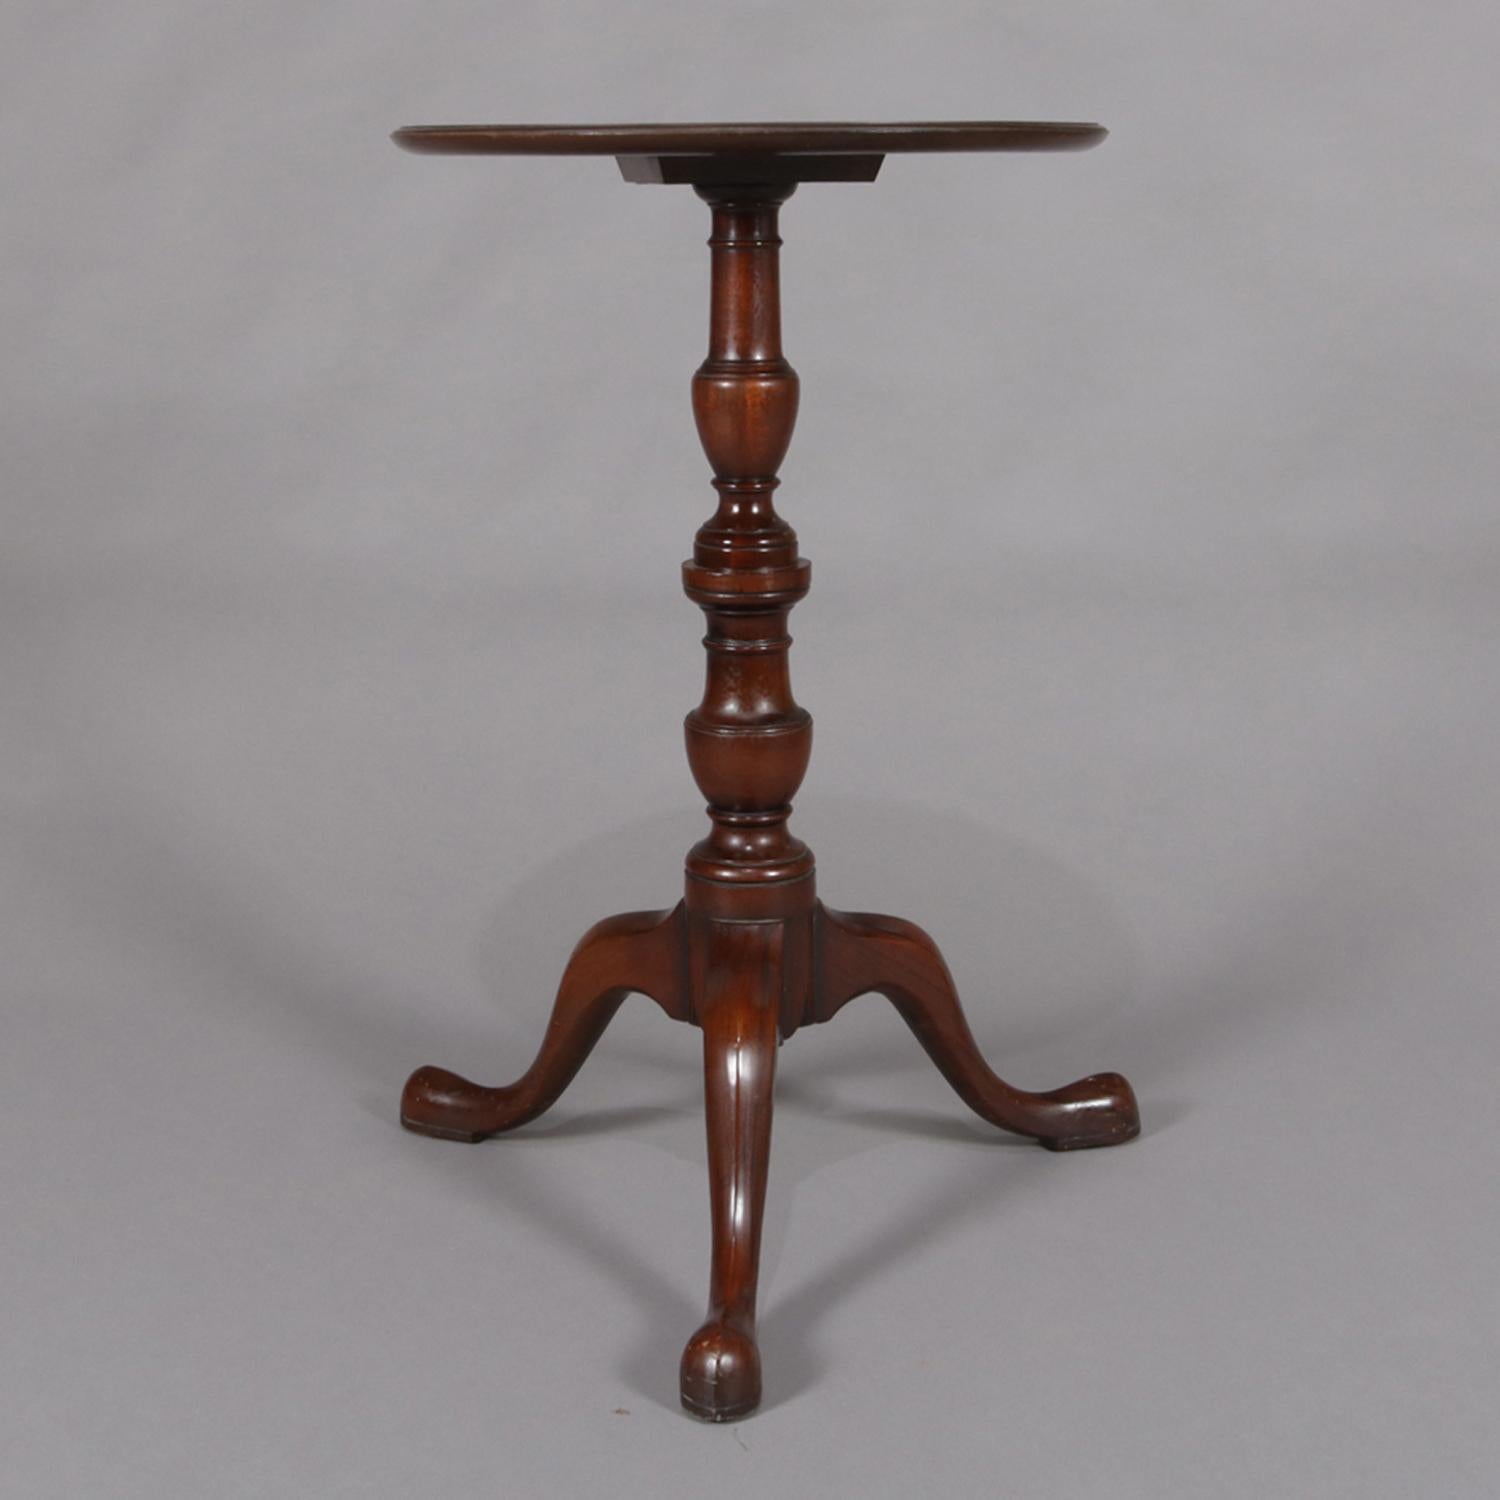 Vintage Queen Anne style side stand by Kittinger features dish form display top over turned column base and raised on three cabriole legs terminating in pad feet, original aker label on top base as photographed, circa 1940.

Measures: 31